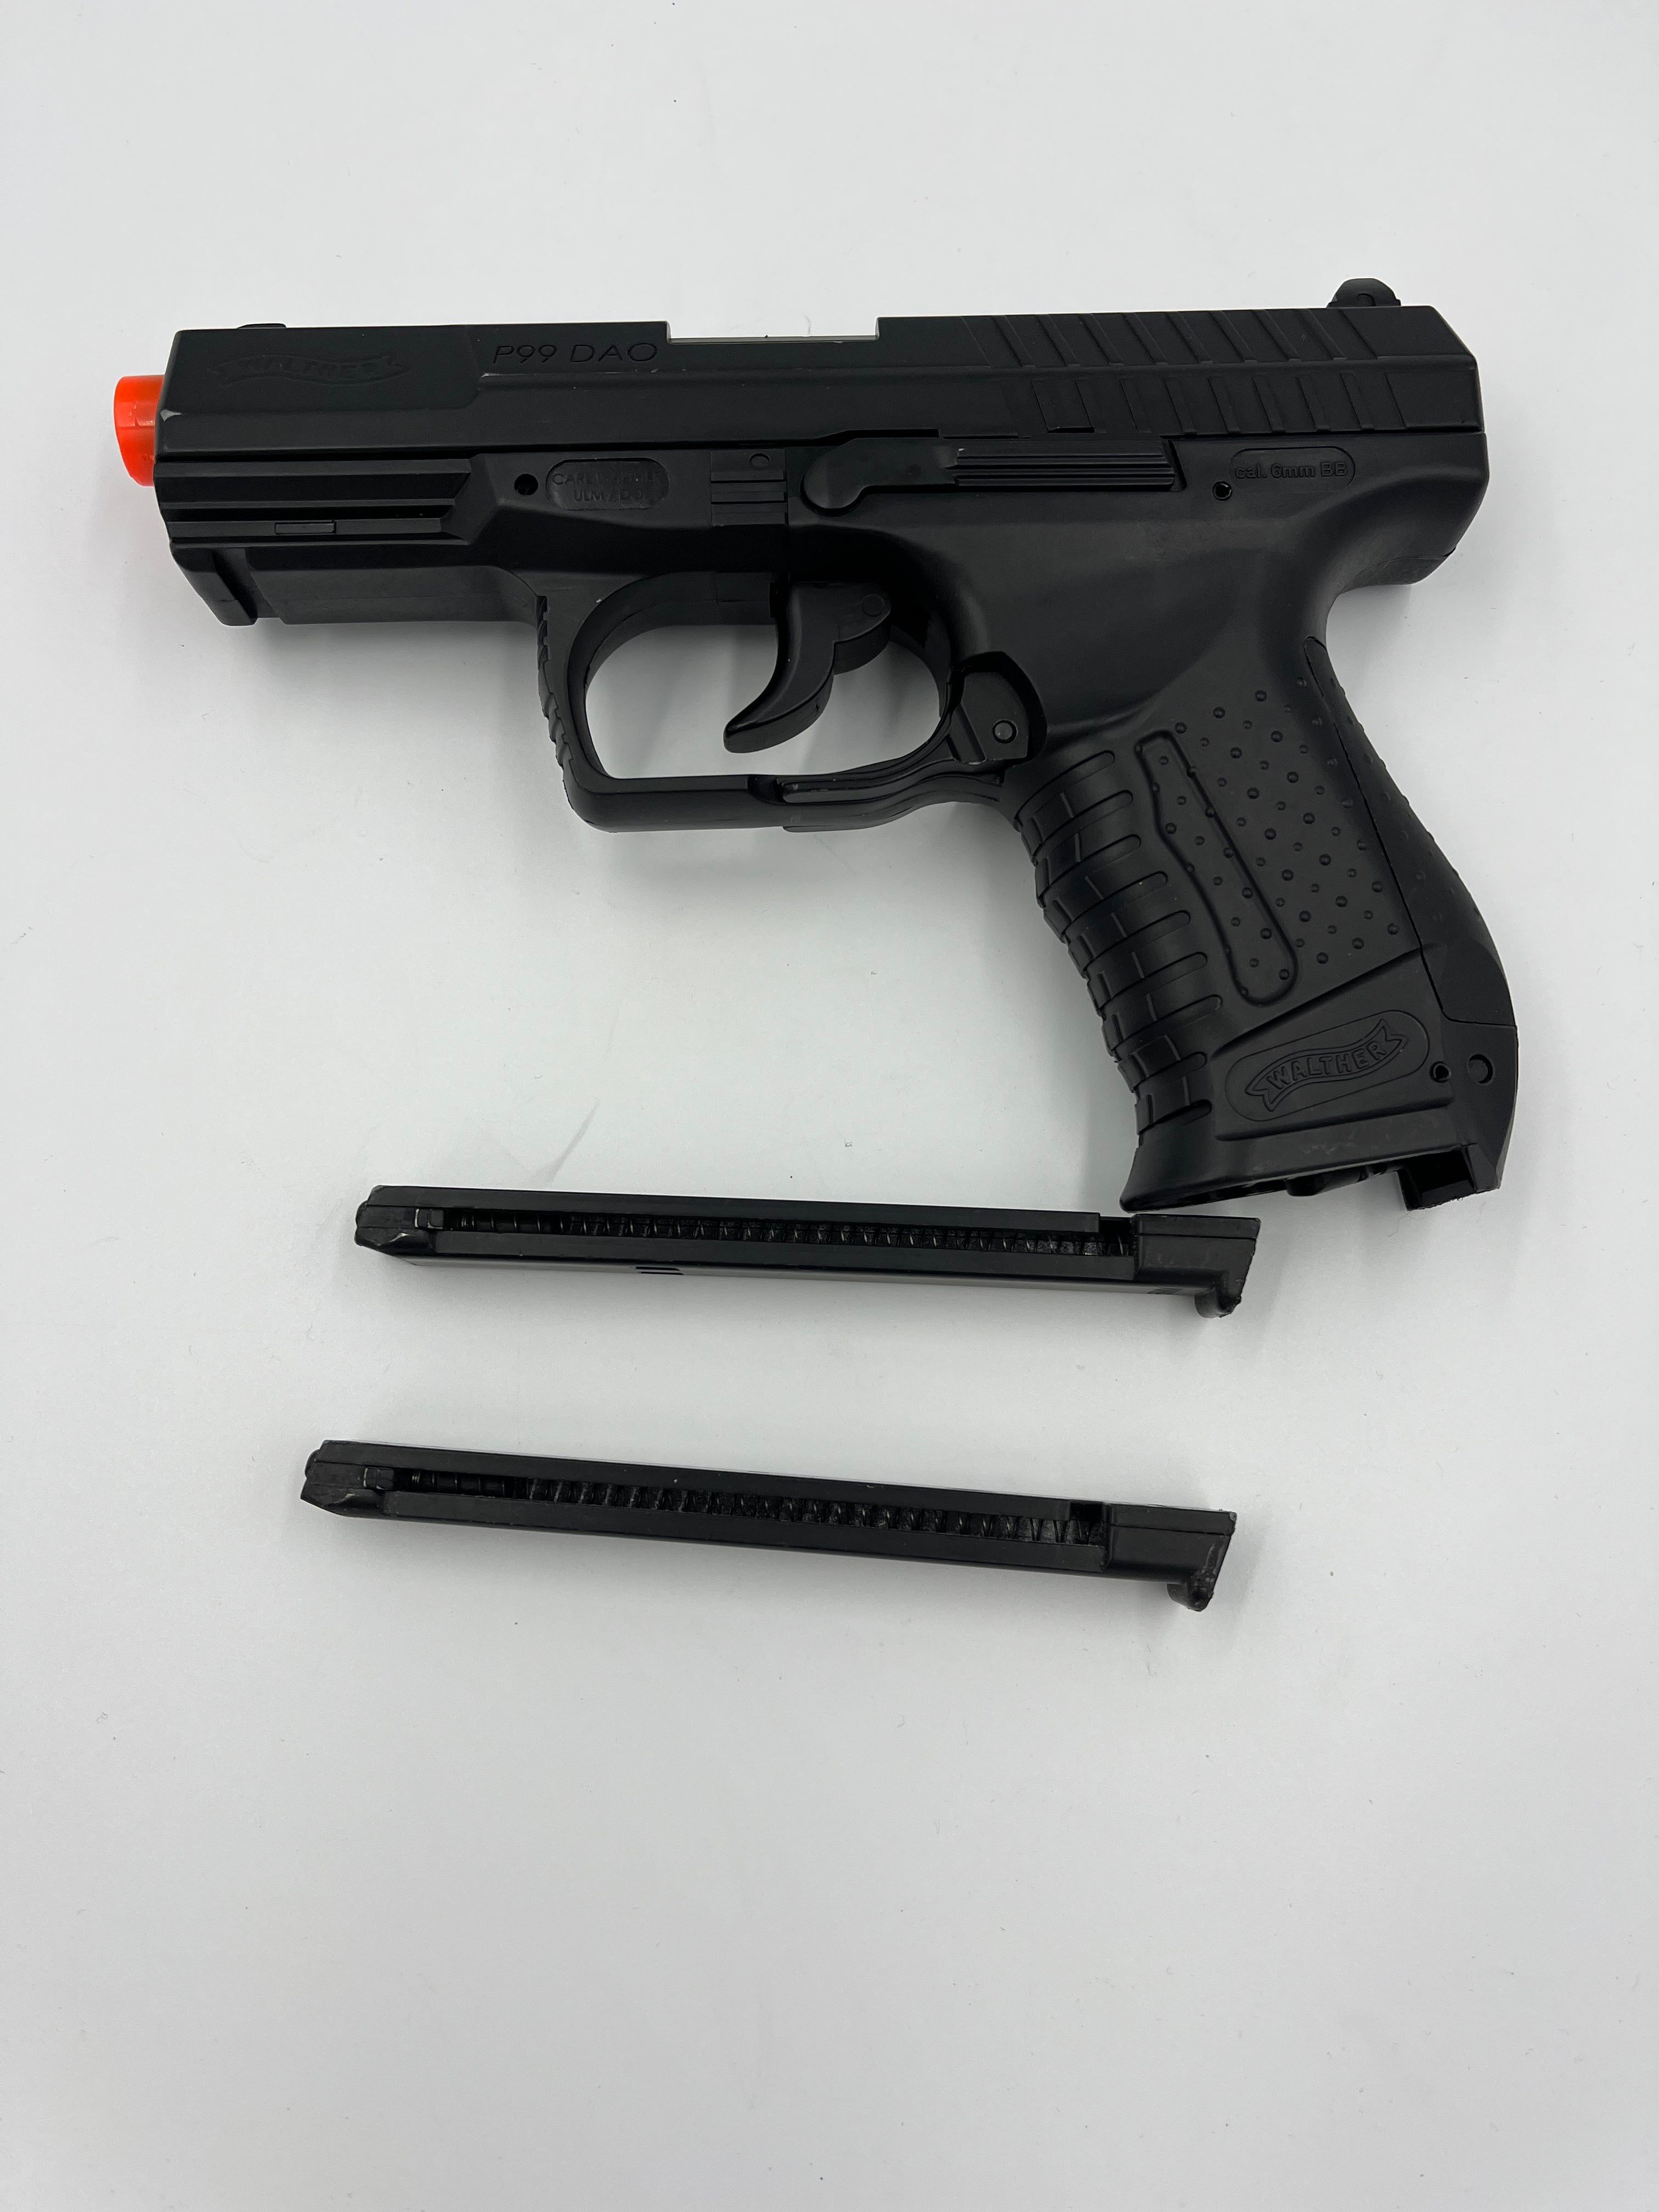 USED Umarex Walther P99 DAO